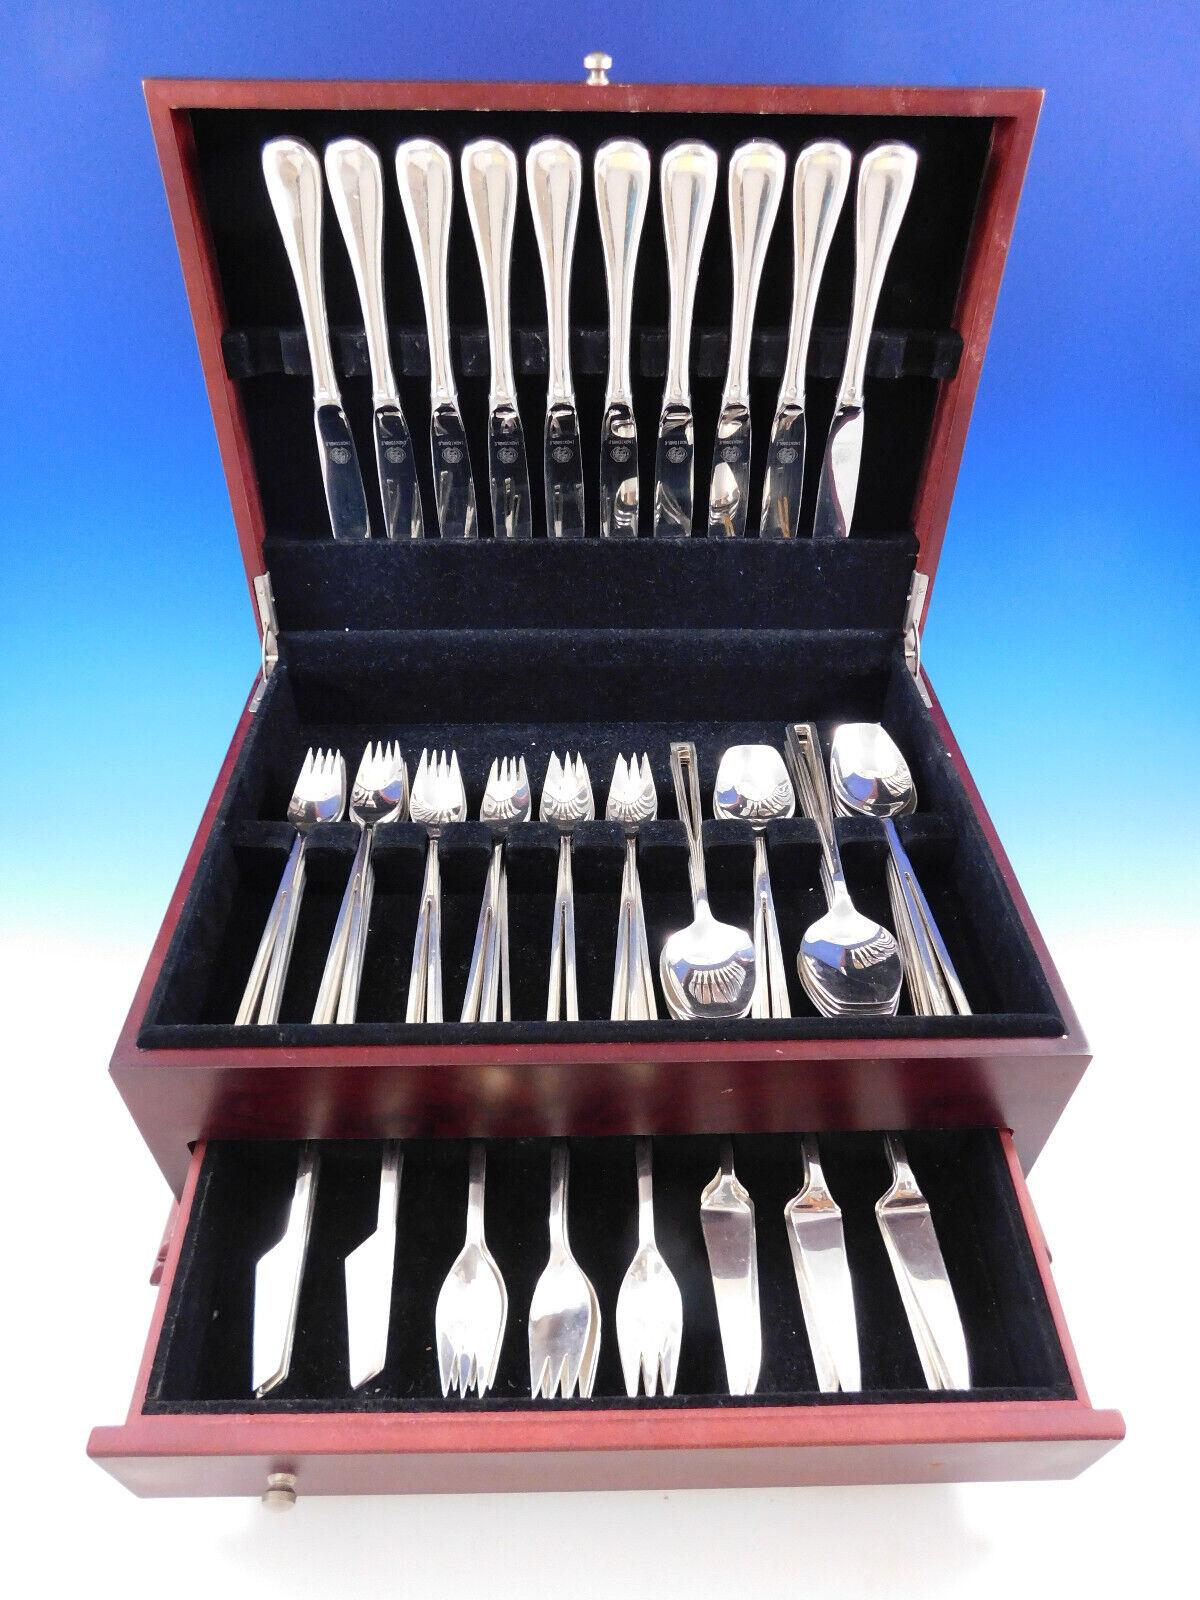 Mid-Century Modern Avanti by Codan Mexican sterling silver dinner flatware set with unique cut out handle design, 90 pieces total (including 10 dinner knives in another pattern). This set includes:

10 Dinner Size Knives, hollow rounded unadorned